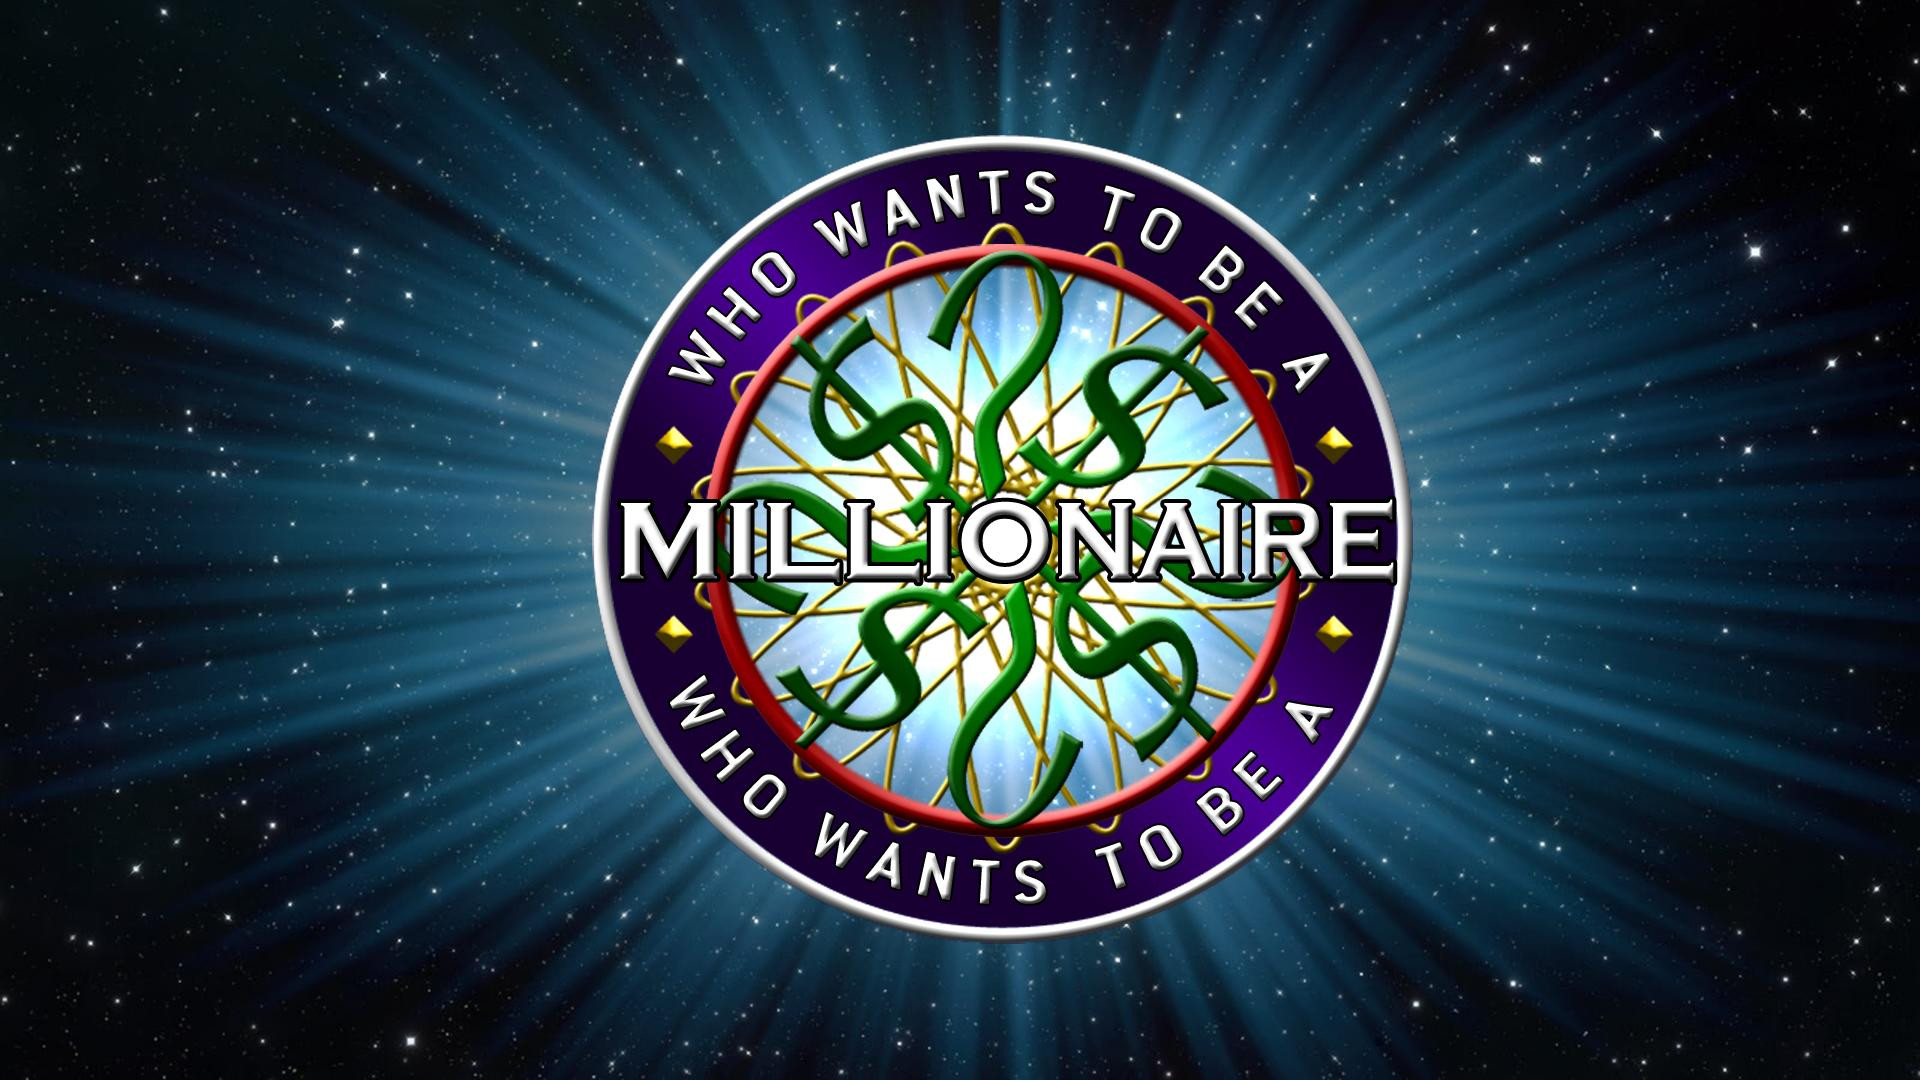 Who Wants To Be A Millionaire #1